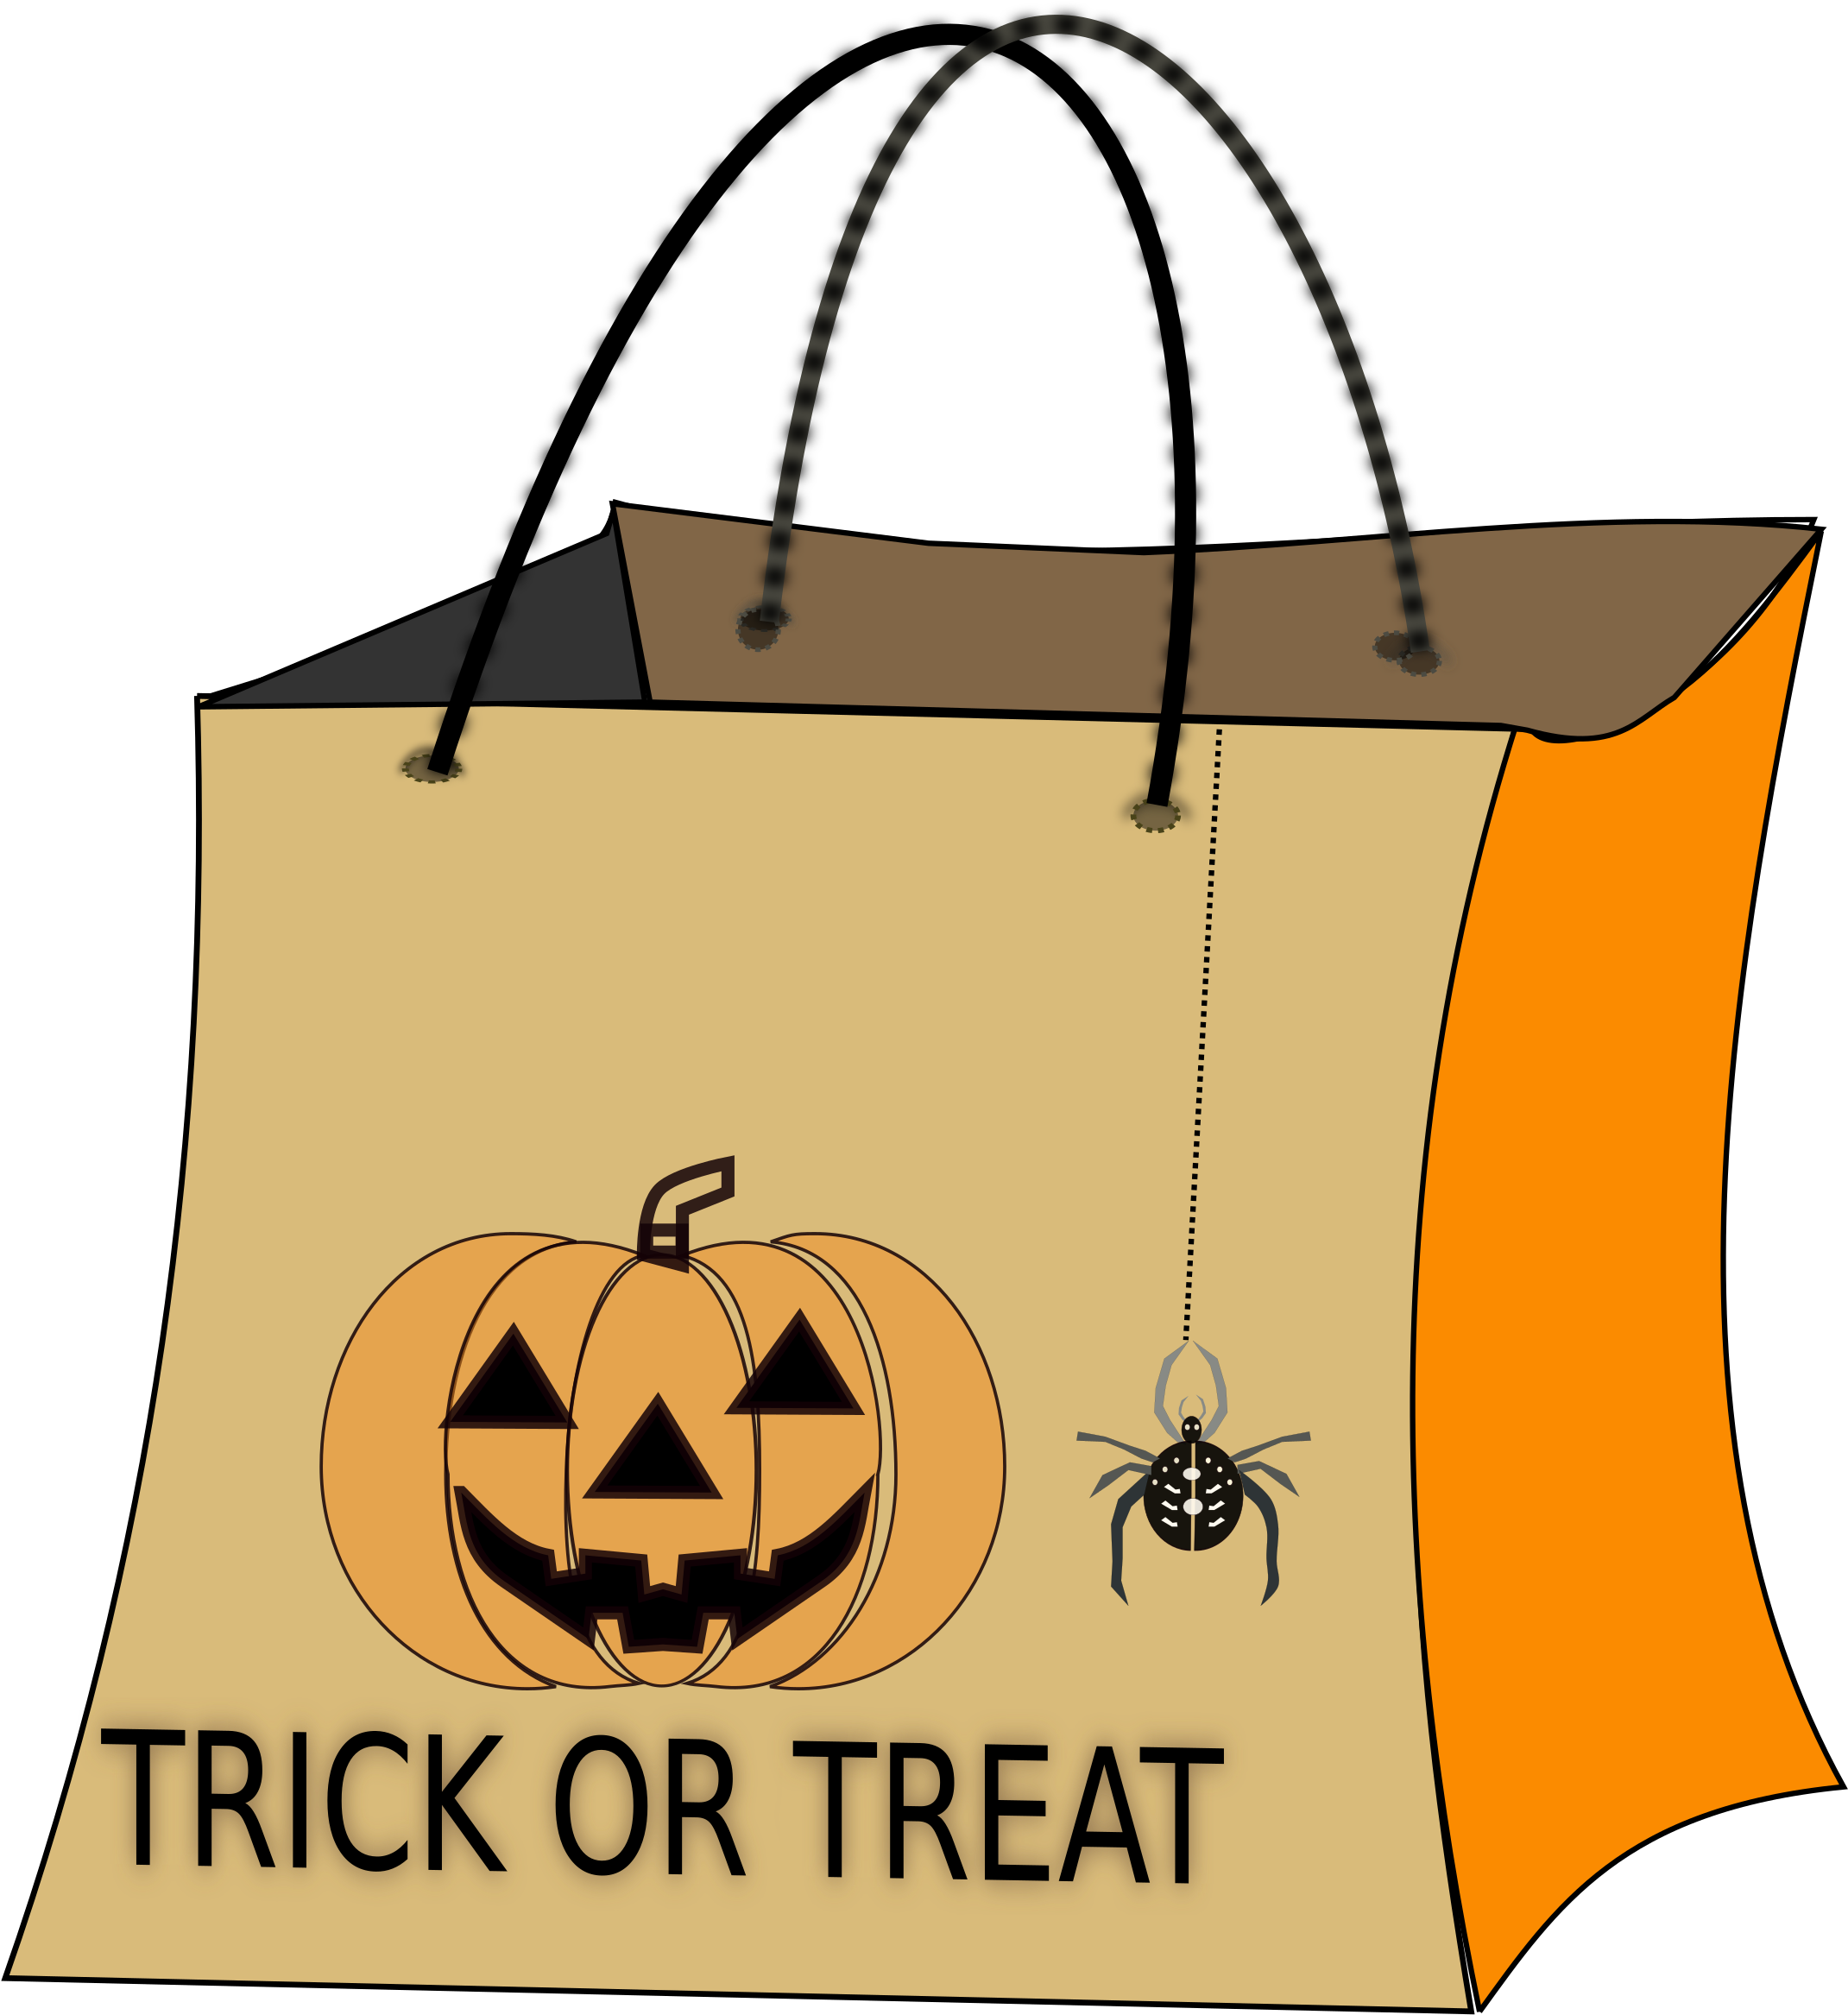 This Free Icons Png Design Of Trick Or Treat Bag - Trick Or Treat Bag (3200x2400)